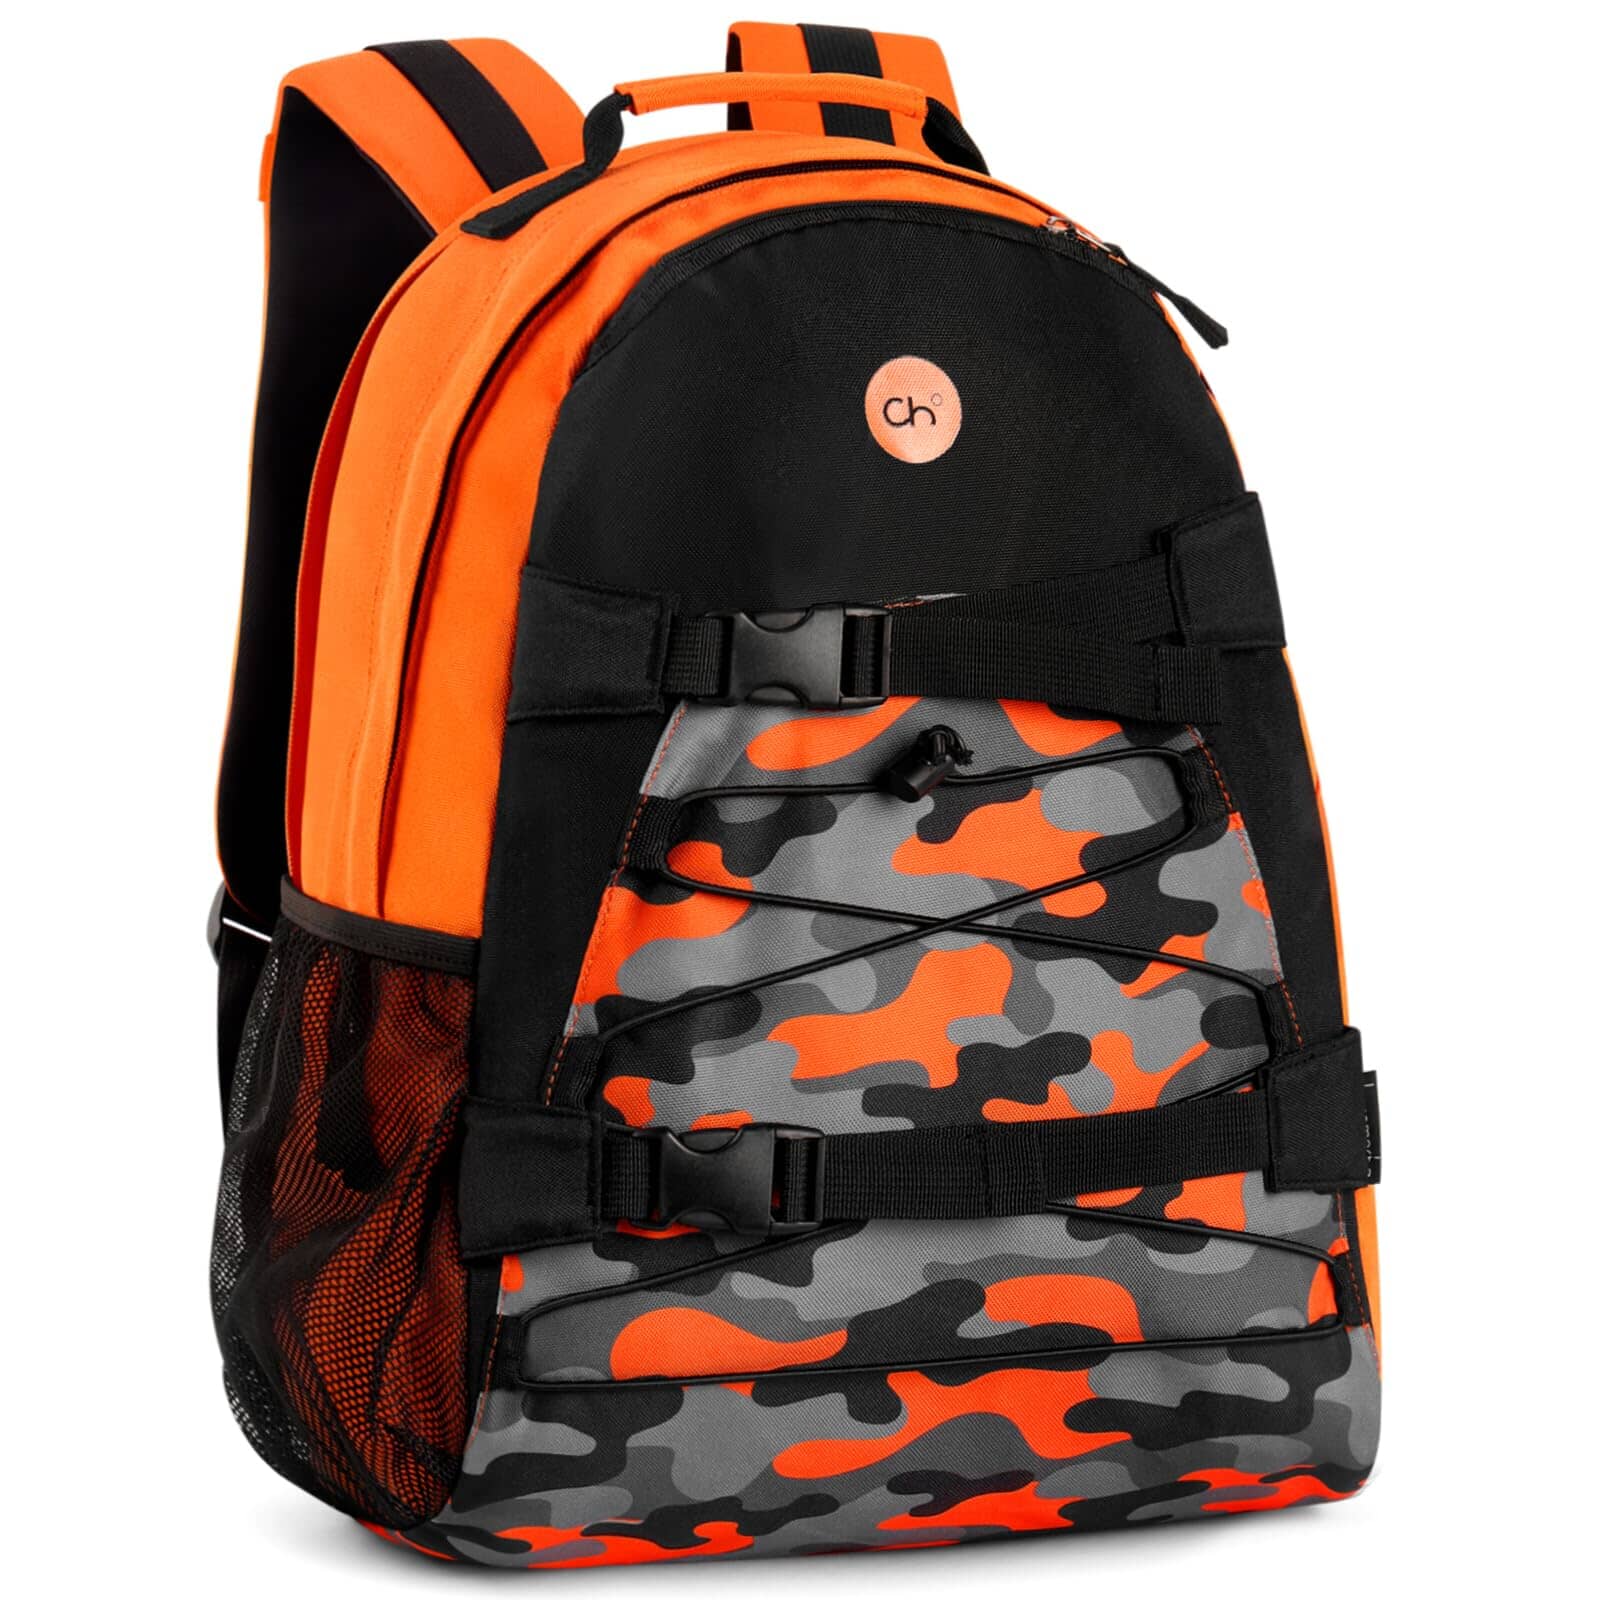 Choco Mocha Boys Camo Backpack for Elementary Middle School, Large Backpack for Kids Teen Boys, 18 Inch, Blue chocomochakids 